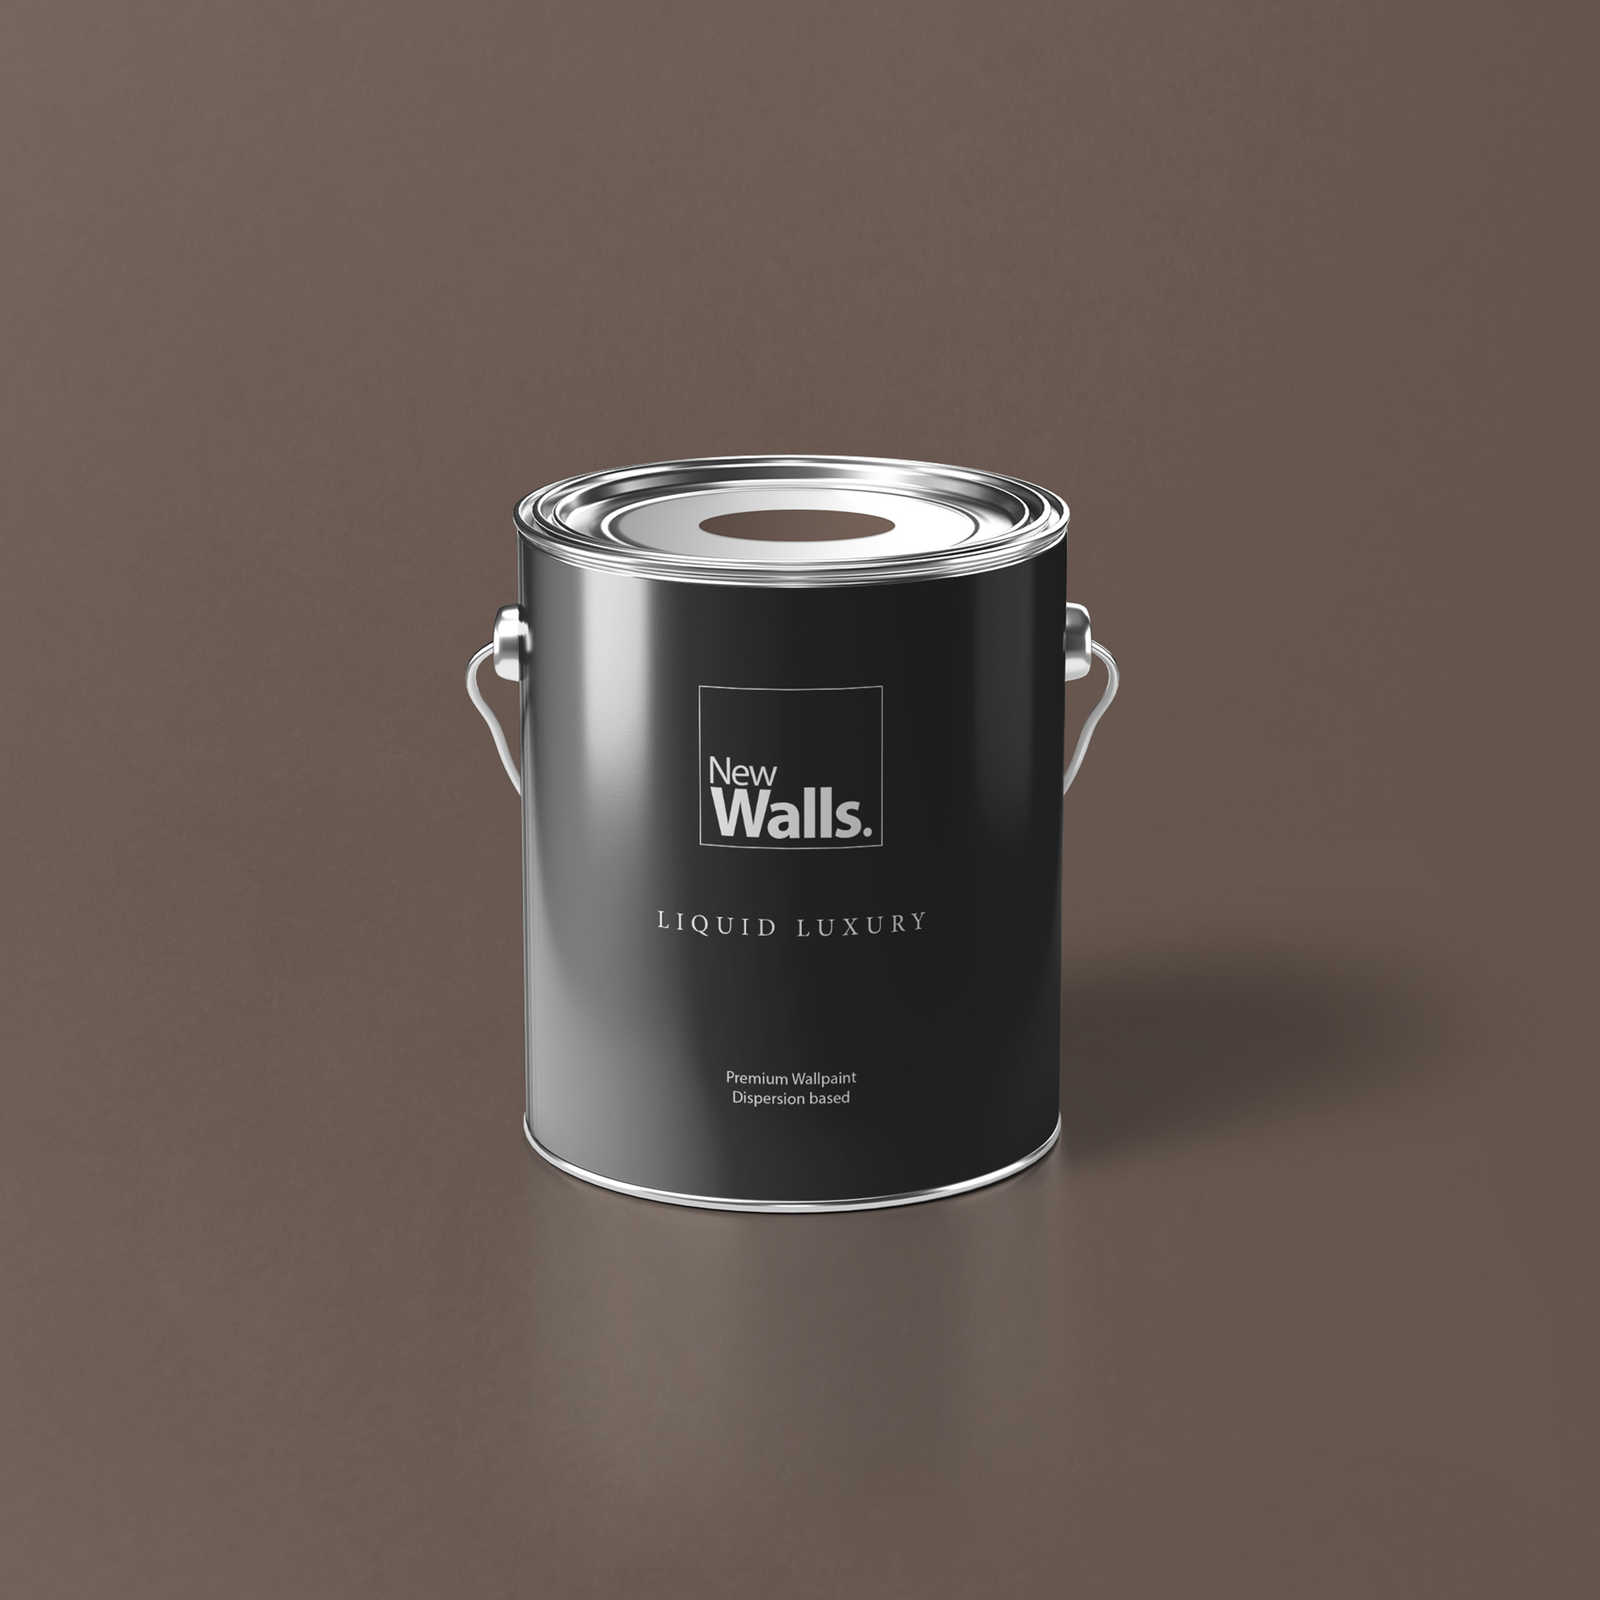 Premium Wall Paint down-to-earth maroon »Modern Mud« NW721 – 2.5 litre
